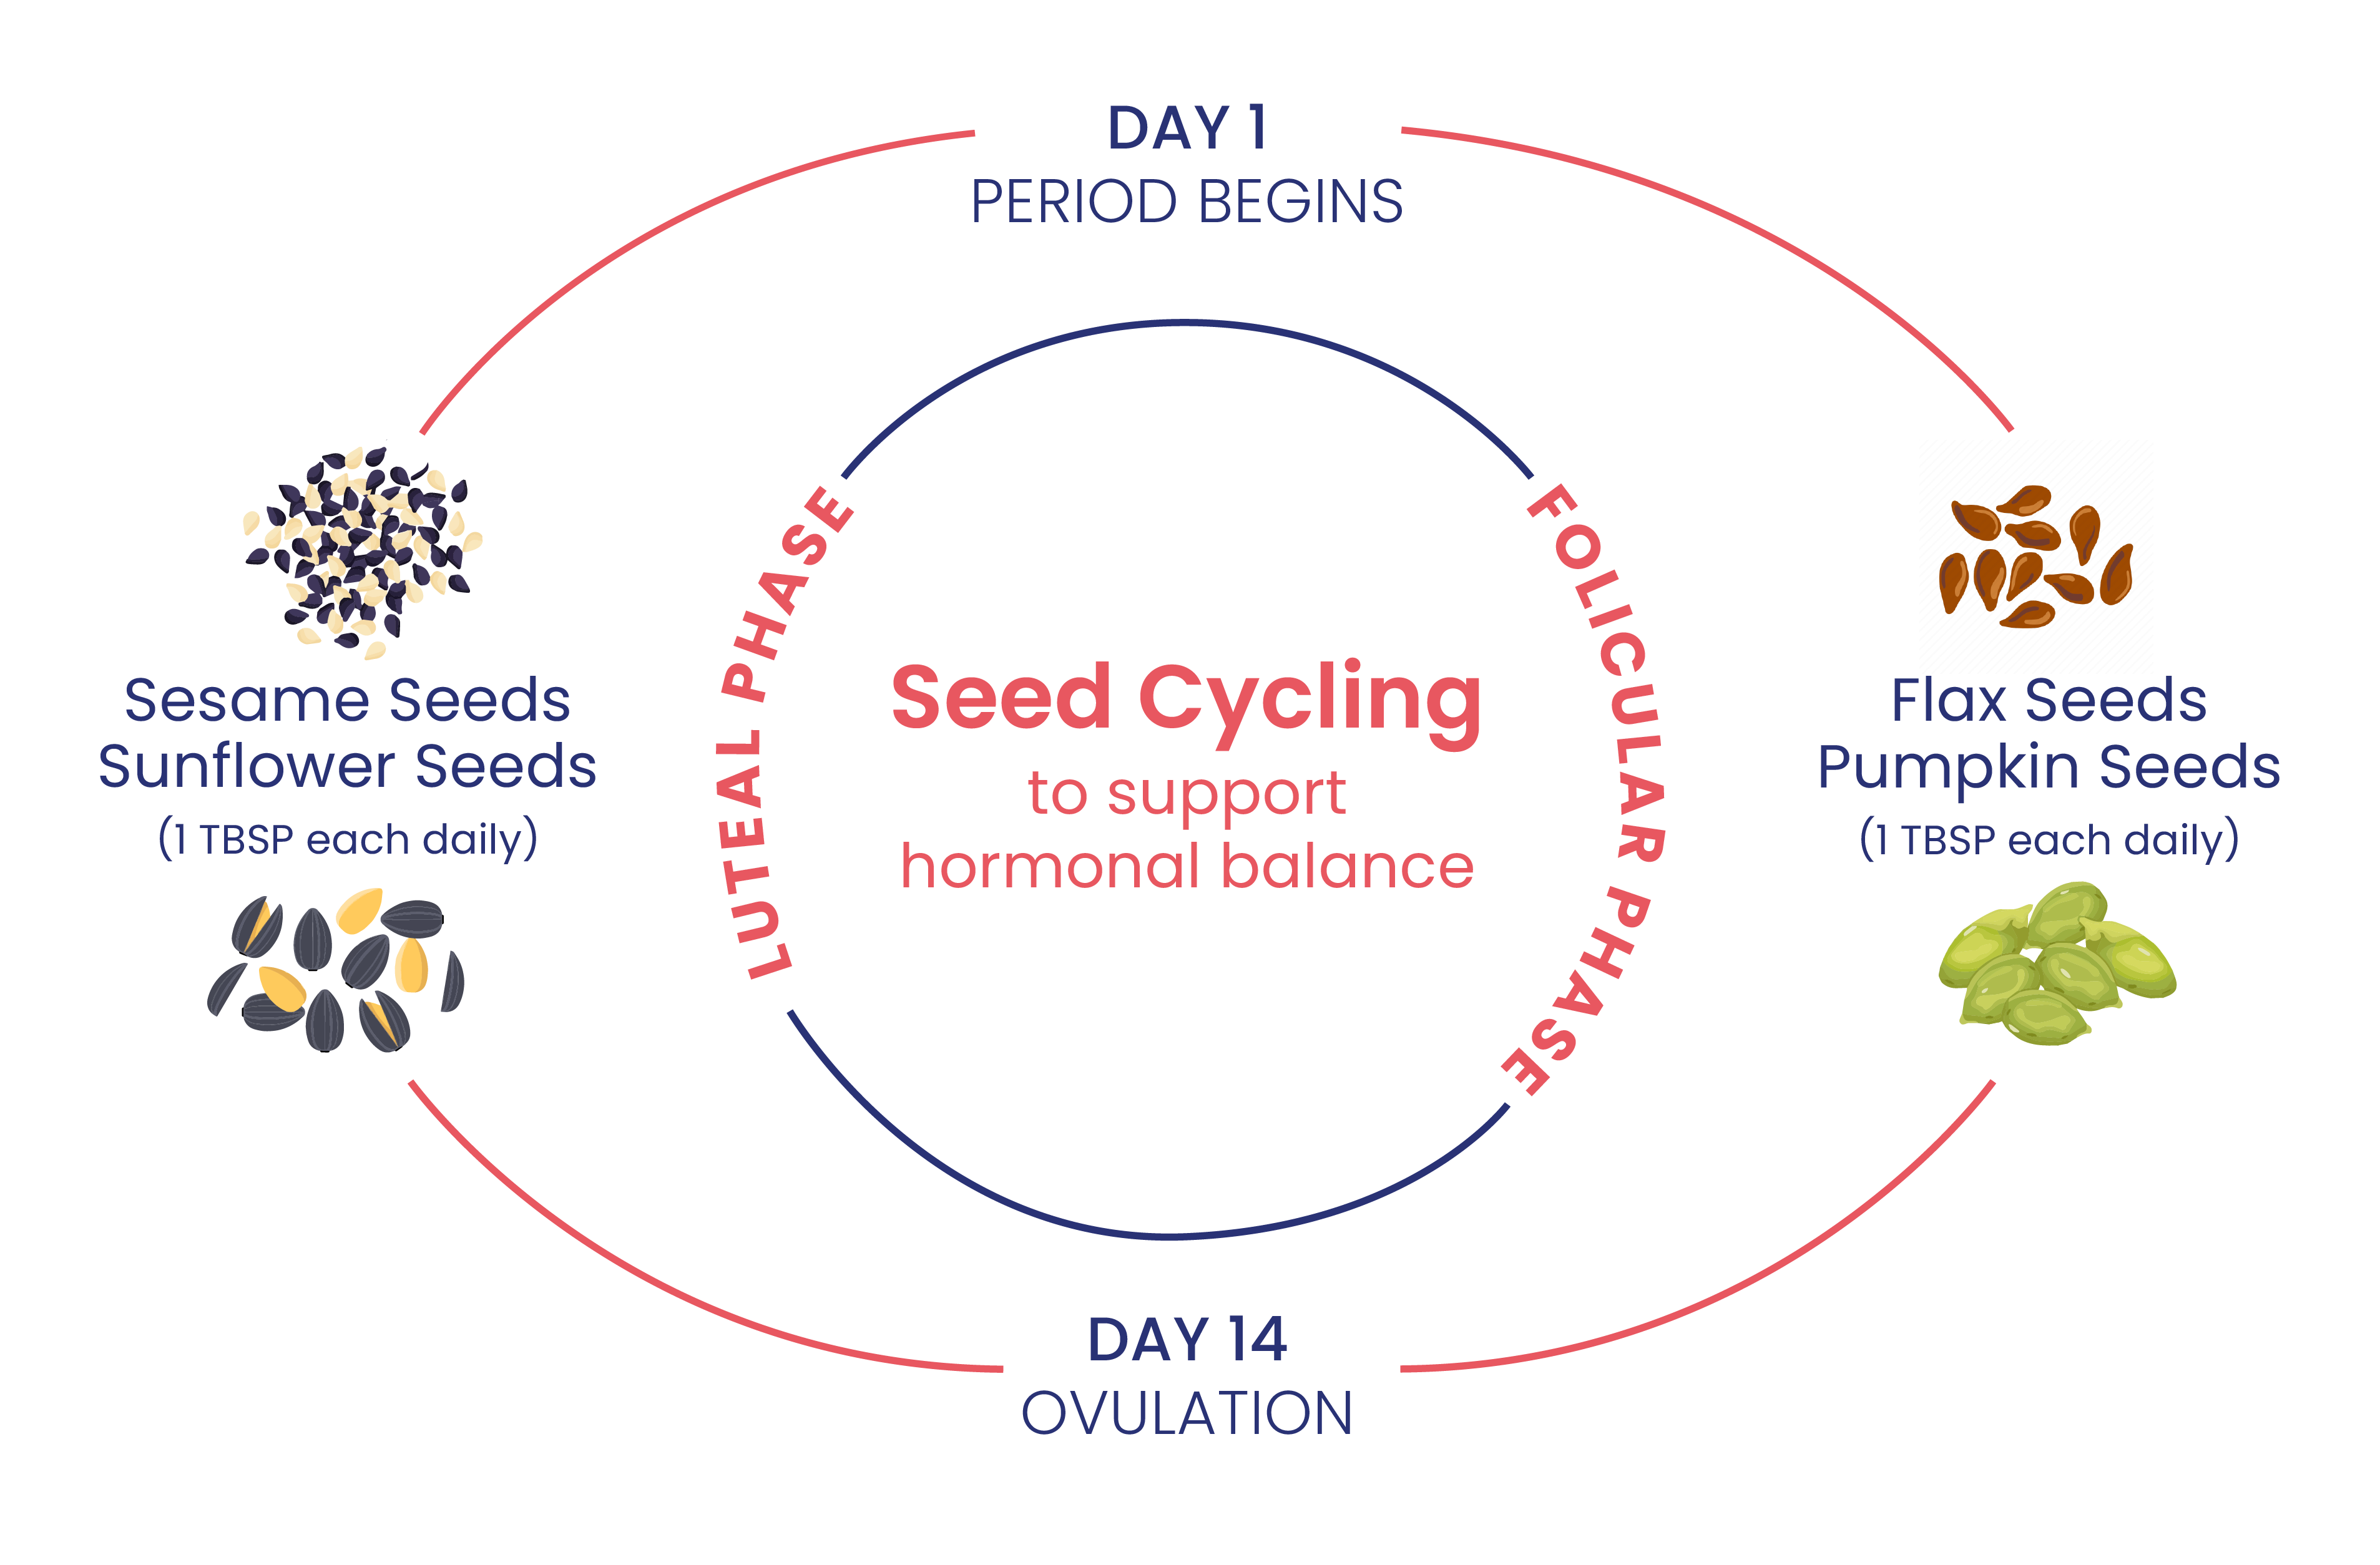 the seed cycle i.e. consuming 1 tablespoon of pumpkin seeds and flax seeds in the follicular phase and and 1 tablespoon of sunflower and sesame seeds in the luteal phase of your menstrual cycle